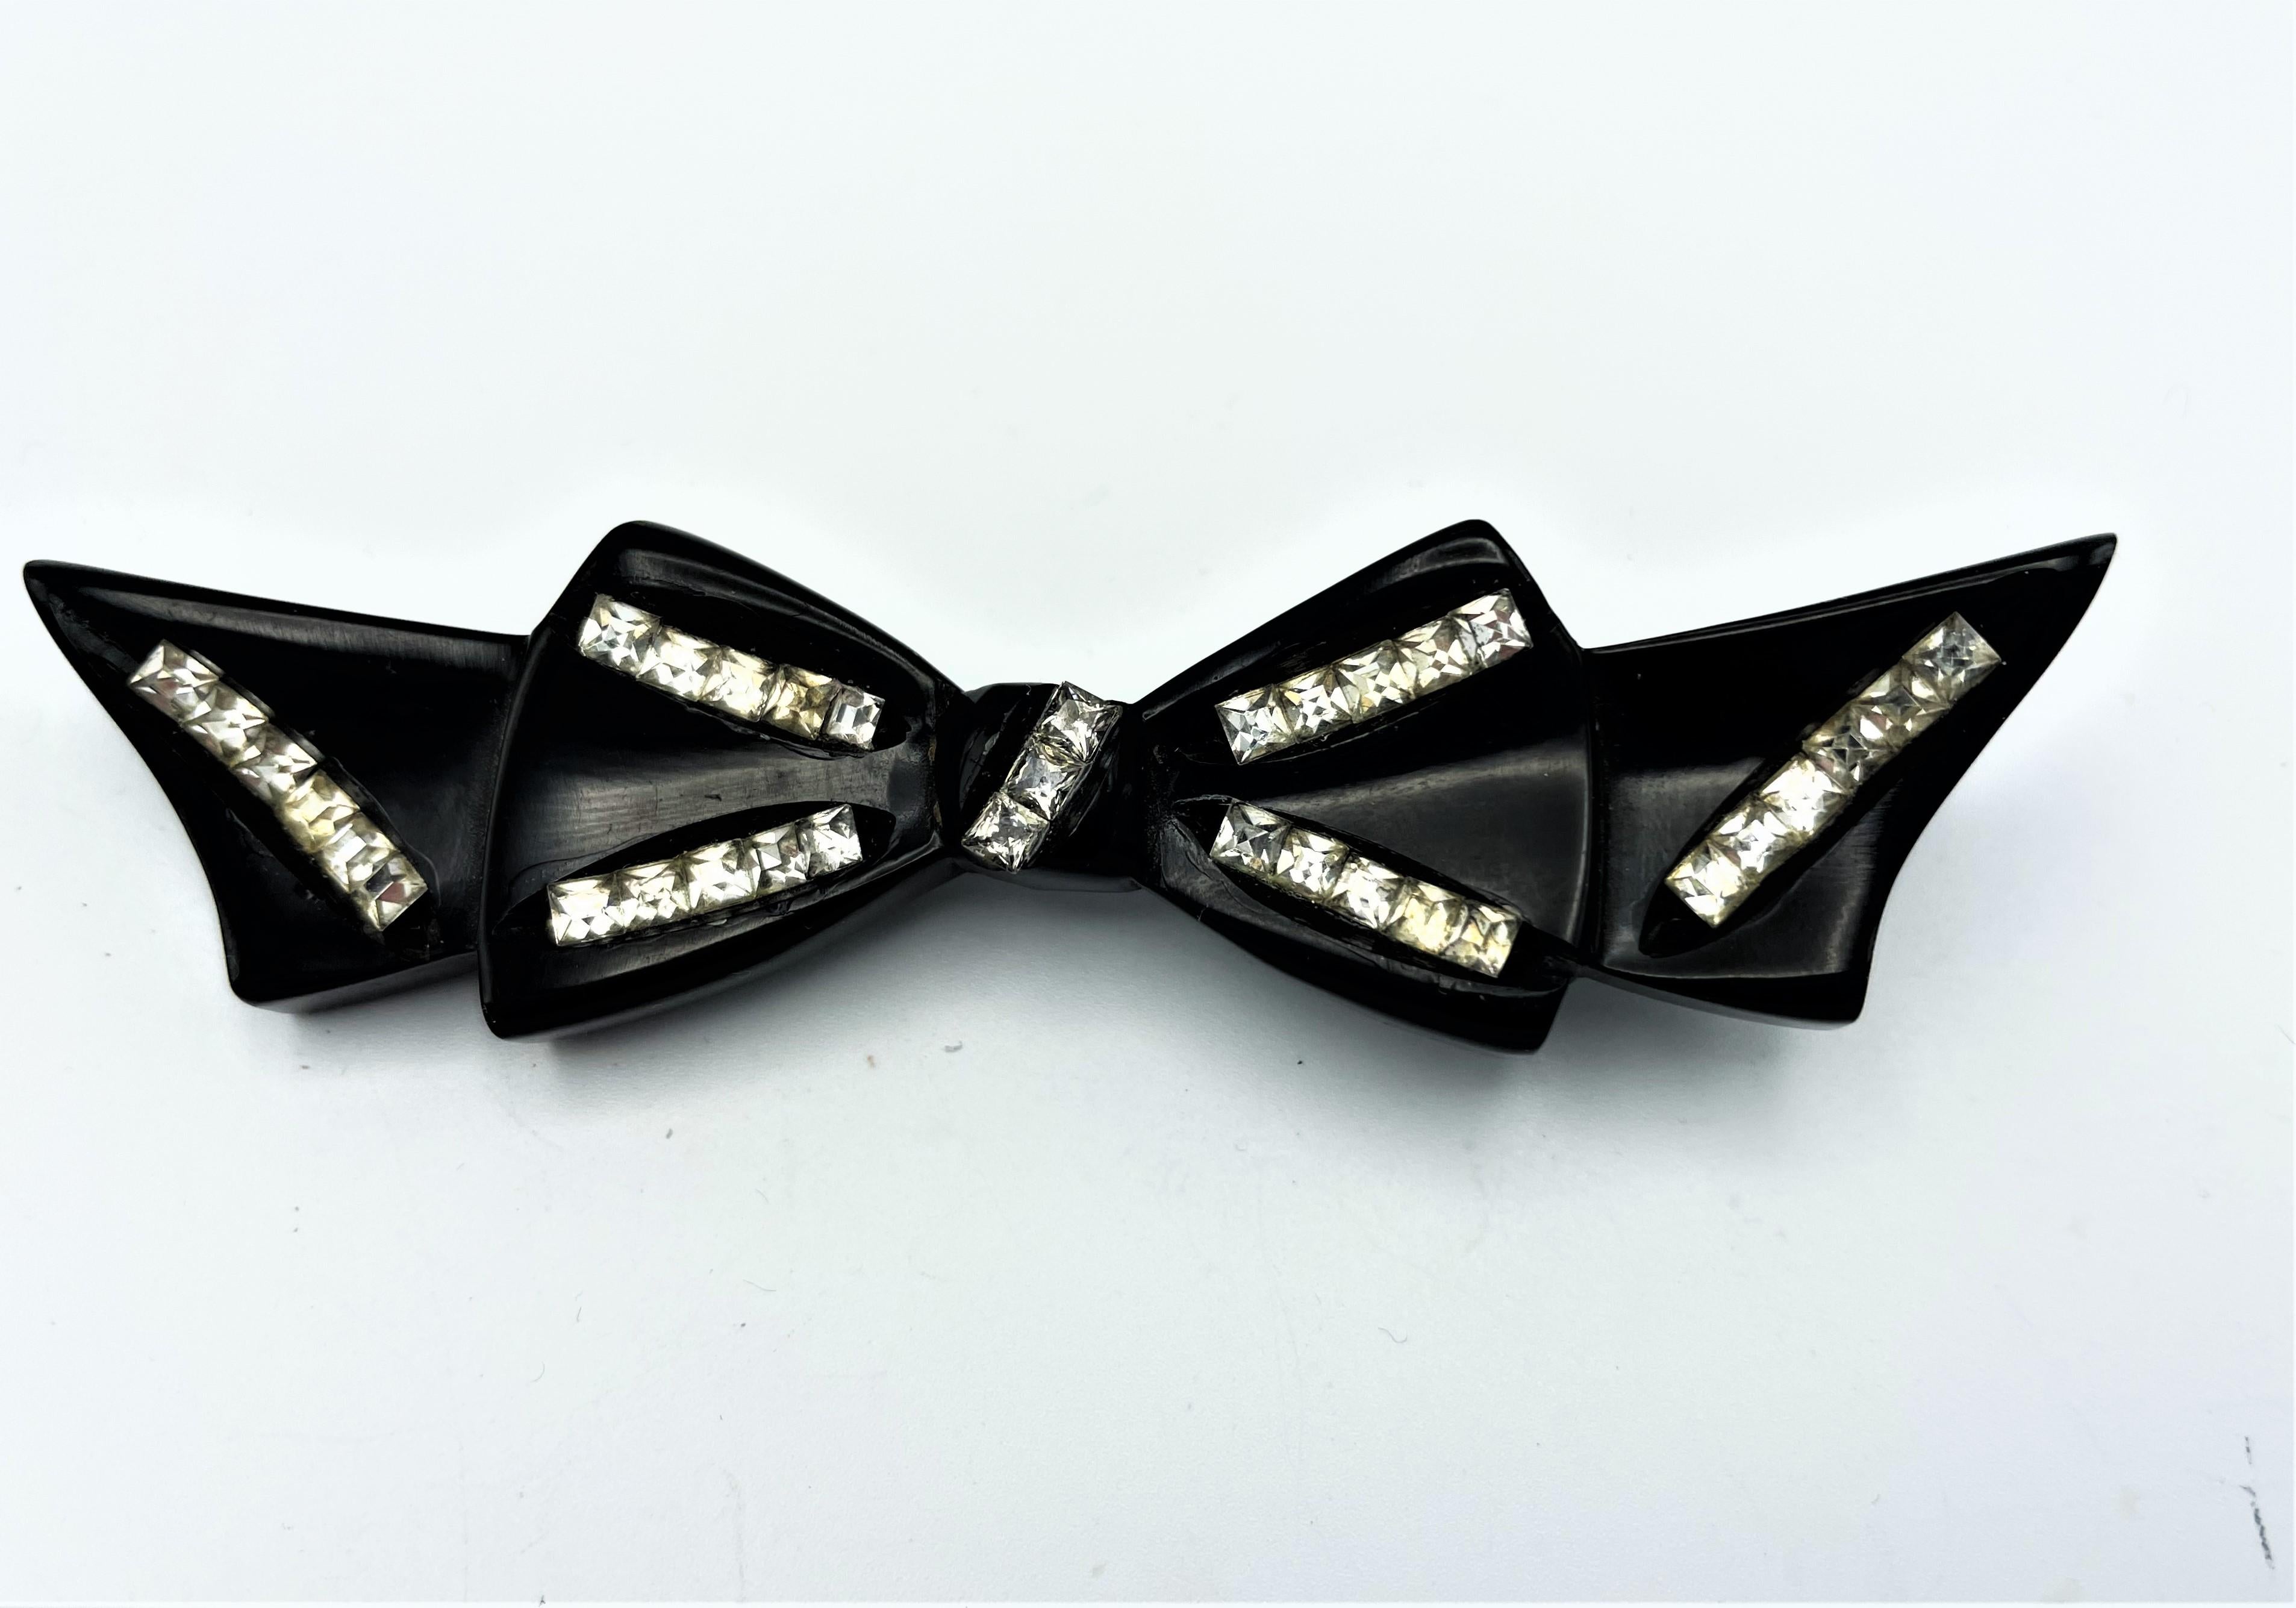 A black Bakelite bow brooch, decorated with many square cut rhinestones embedded in the material.
The deco necklace is sold separately!
Measurement: Width 9,5 cm, Height 2,5 and Deep 0,6 cm. Perfect condition, no missing stones.
